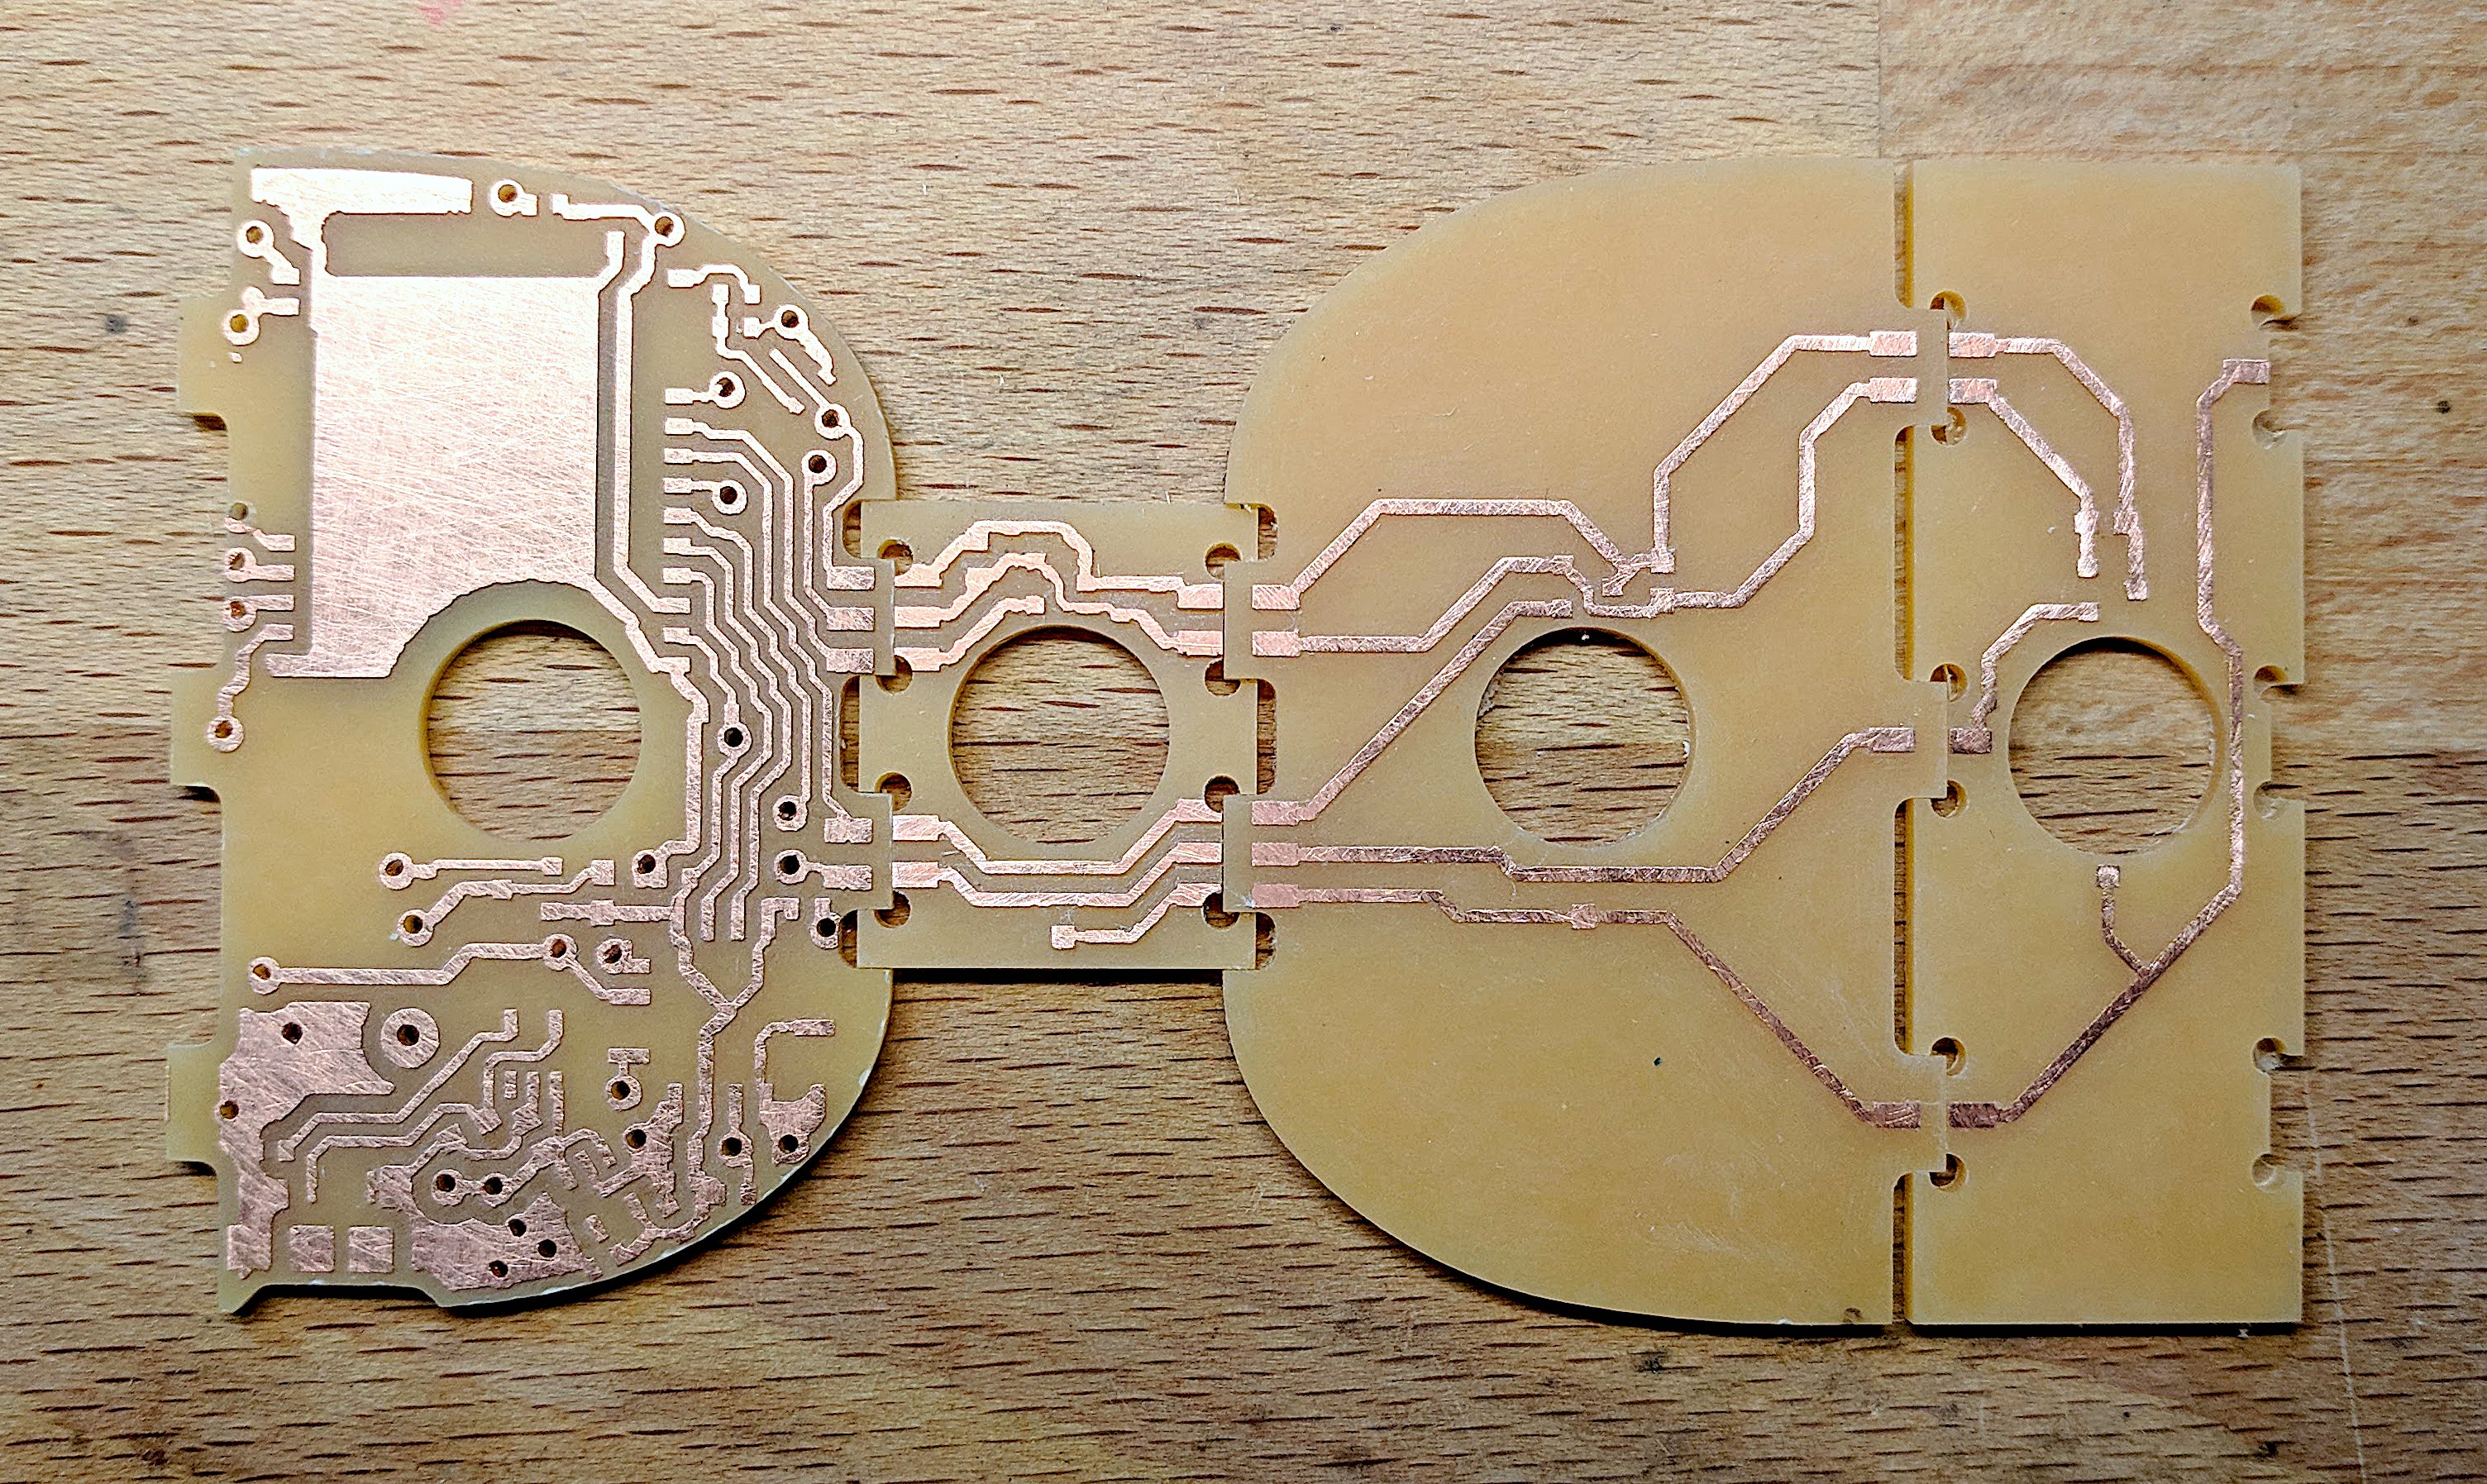 Slotted PCBs fit together to make the sides